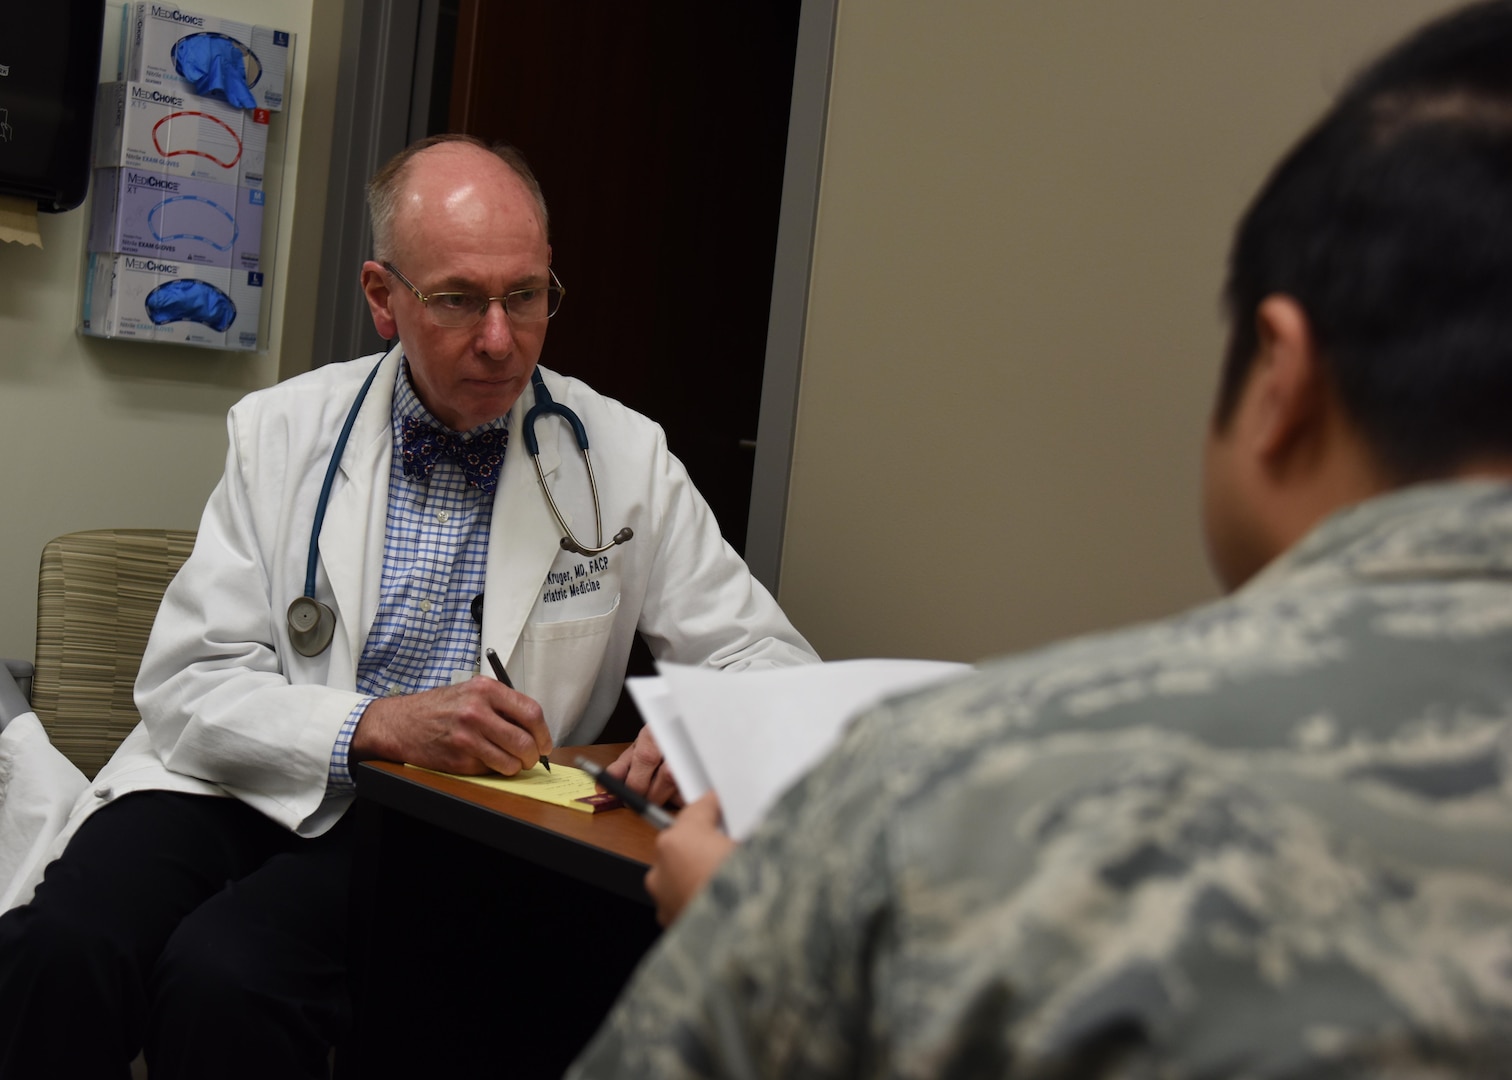 Dr. Robert Kruger, geriatric internal medicine physician, poses for a photo at Wilford Hall Ambulatory Surgical Center, Joint Base San Antonio-Lackland, Texas, April 25, 2019. Kruger is one of three geriatric internal medicine physicians in the Air Force.